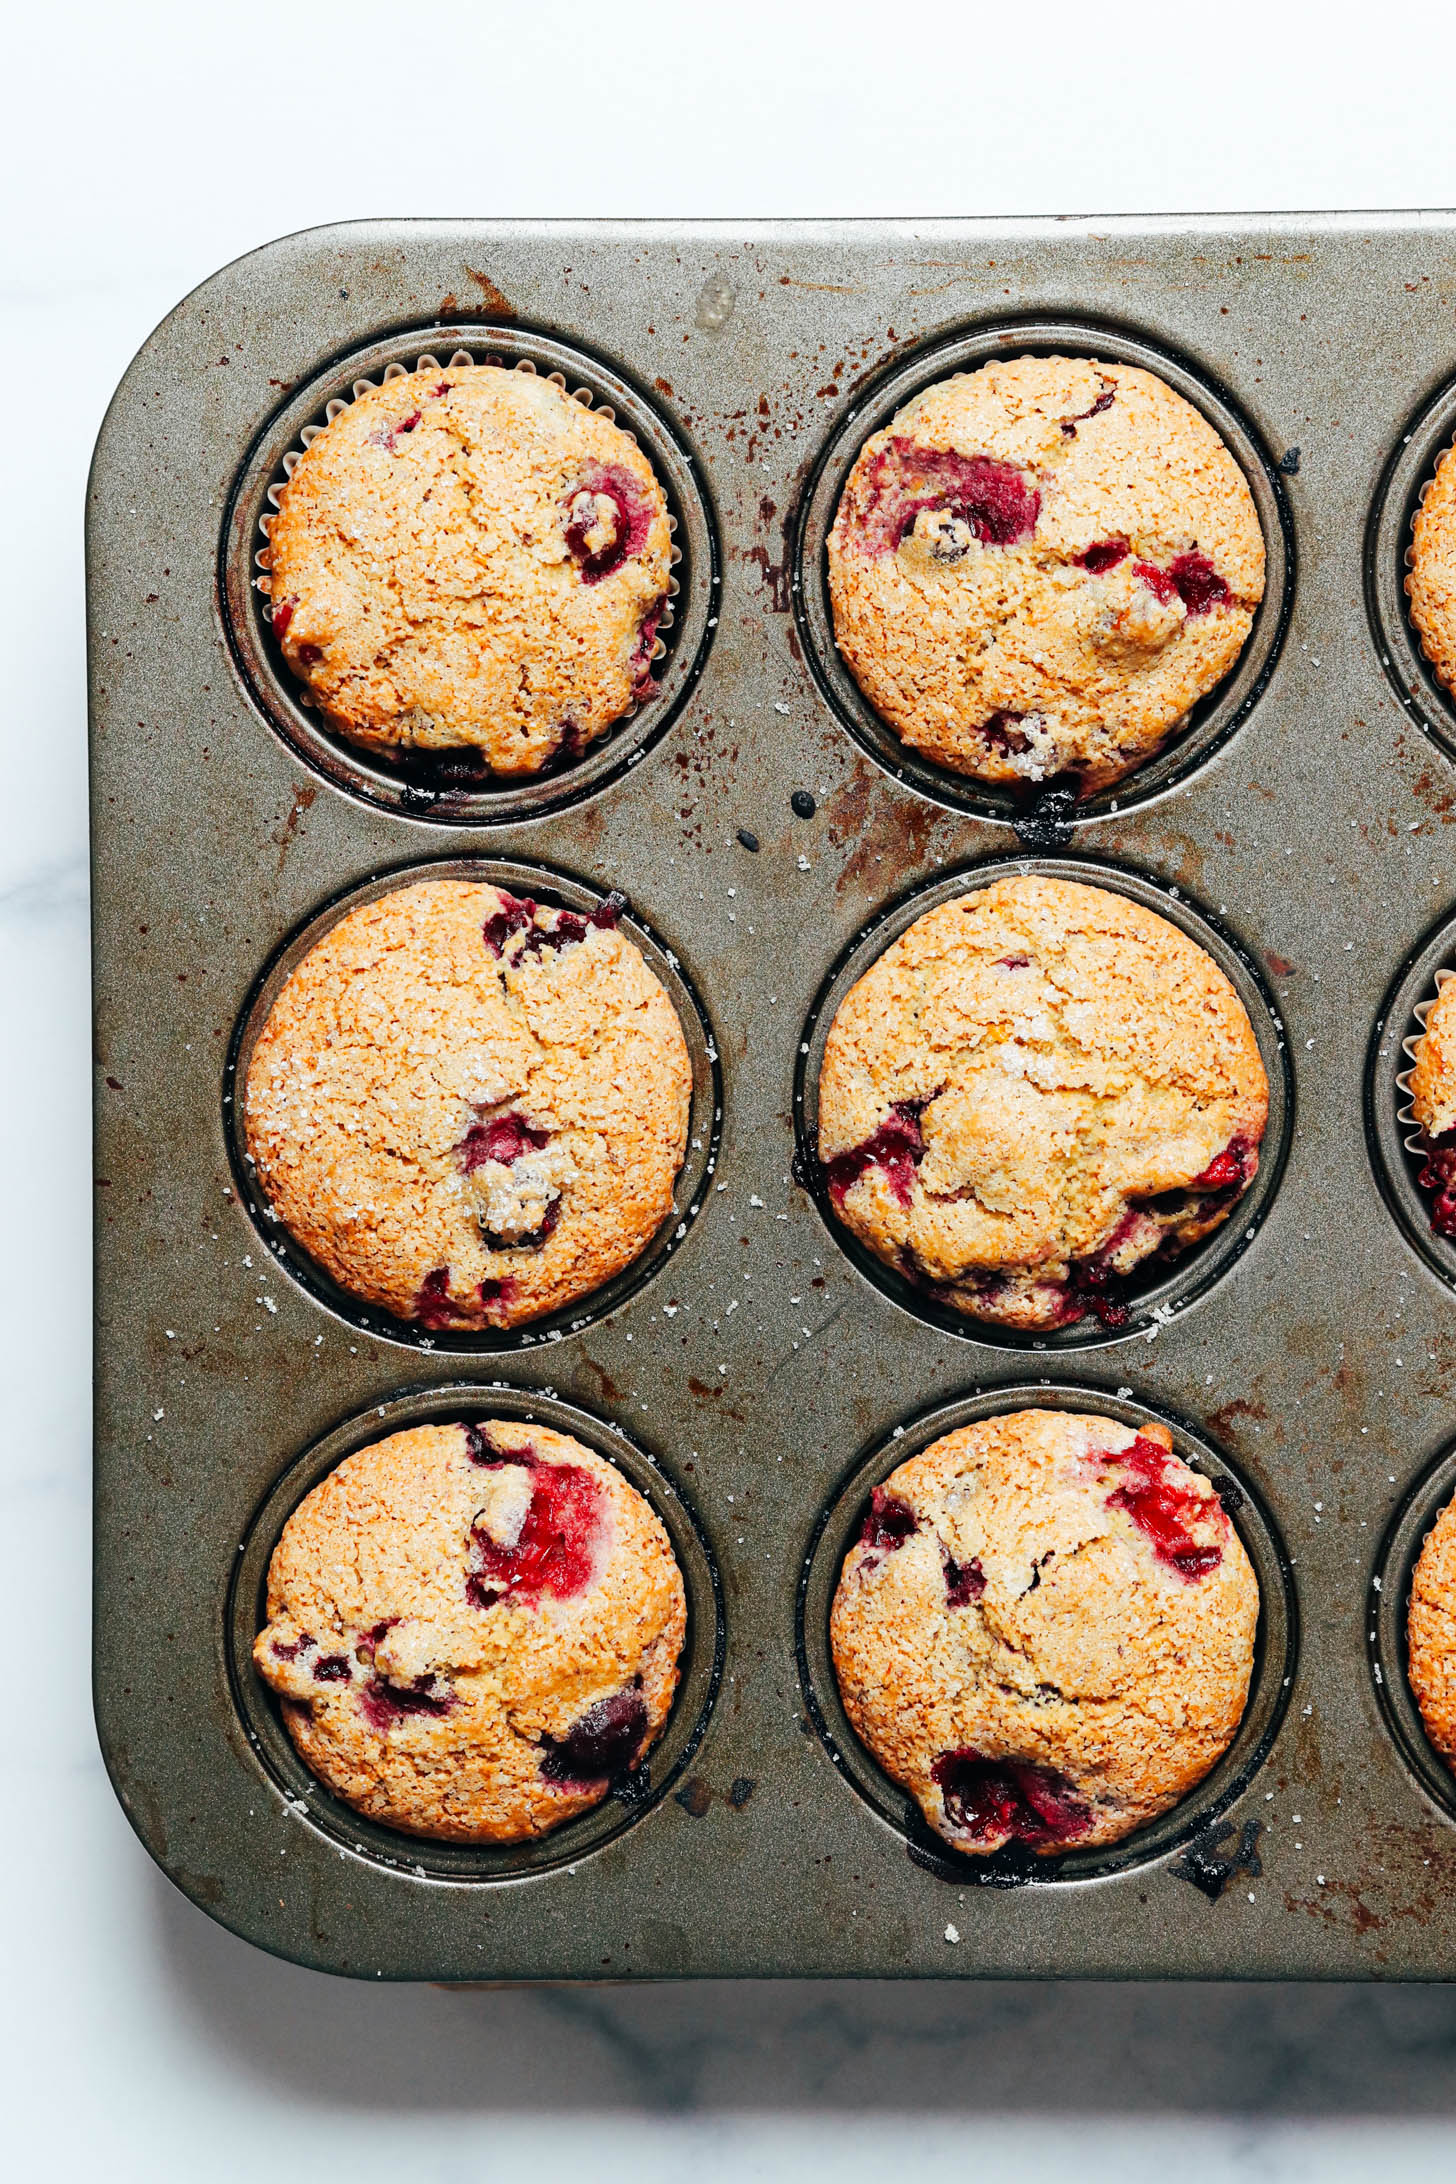 Top down shot of freshly baked vegan gluten free cranberry orange muffins in a muffin tin